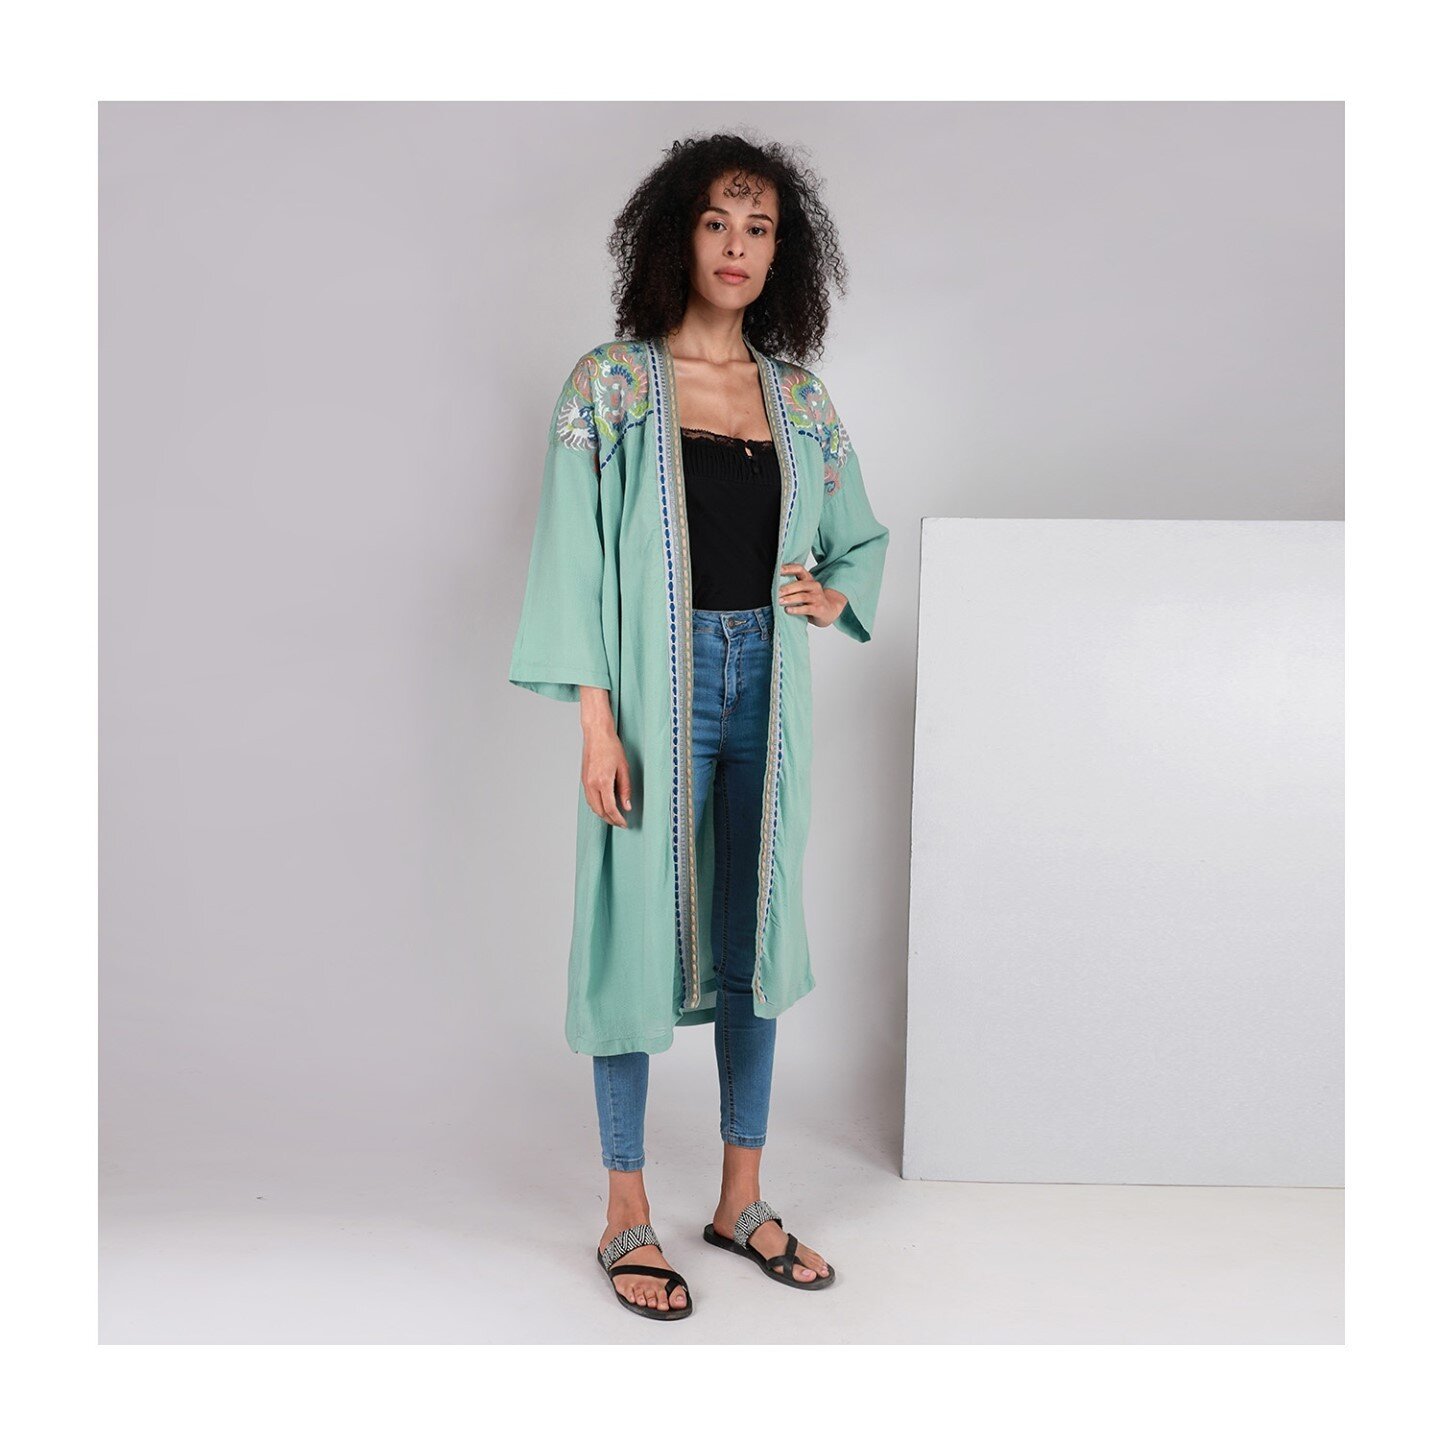 Another easy one size coverup, this time with extensively detailed shoulders for that unmistakably bohemian &quot;laisser faire&quot; look. Perfect with light distressed denim, loosely belted on some days to add some silhouette.⁠
#bl_nk_london⁠⁠
.⁠⁠
